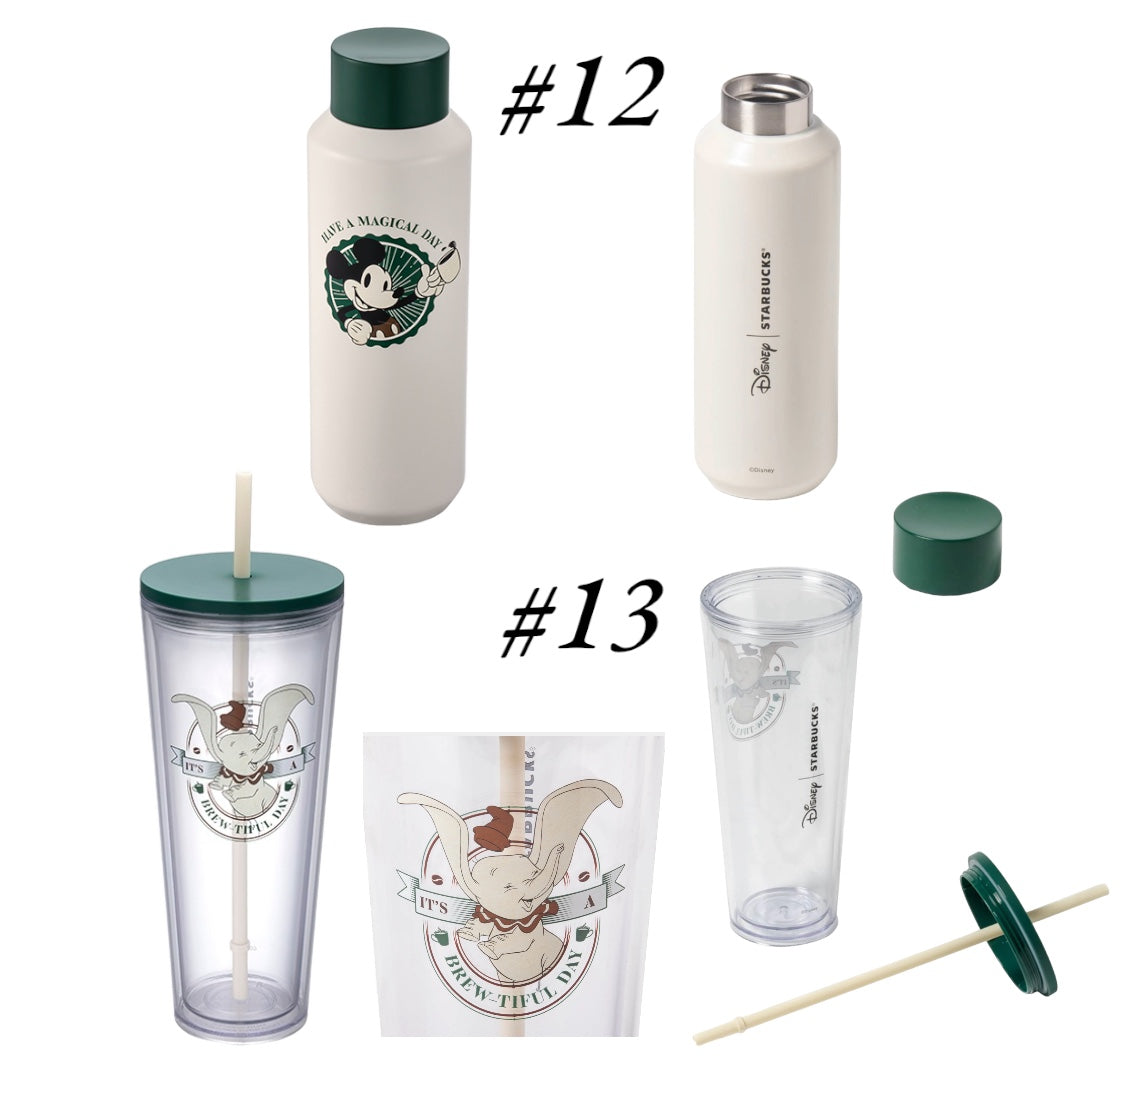 Enjoy a cold drink with these new Disney Starbucks tumblers and water  bottles